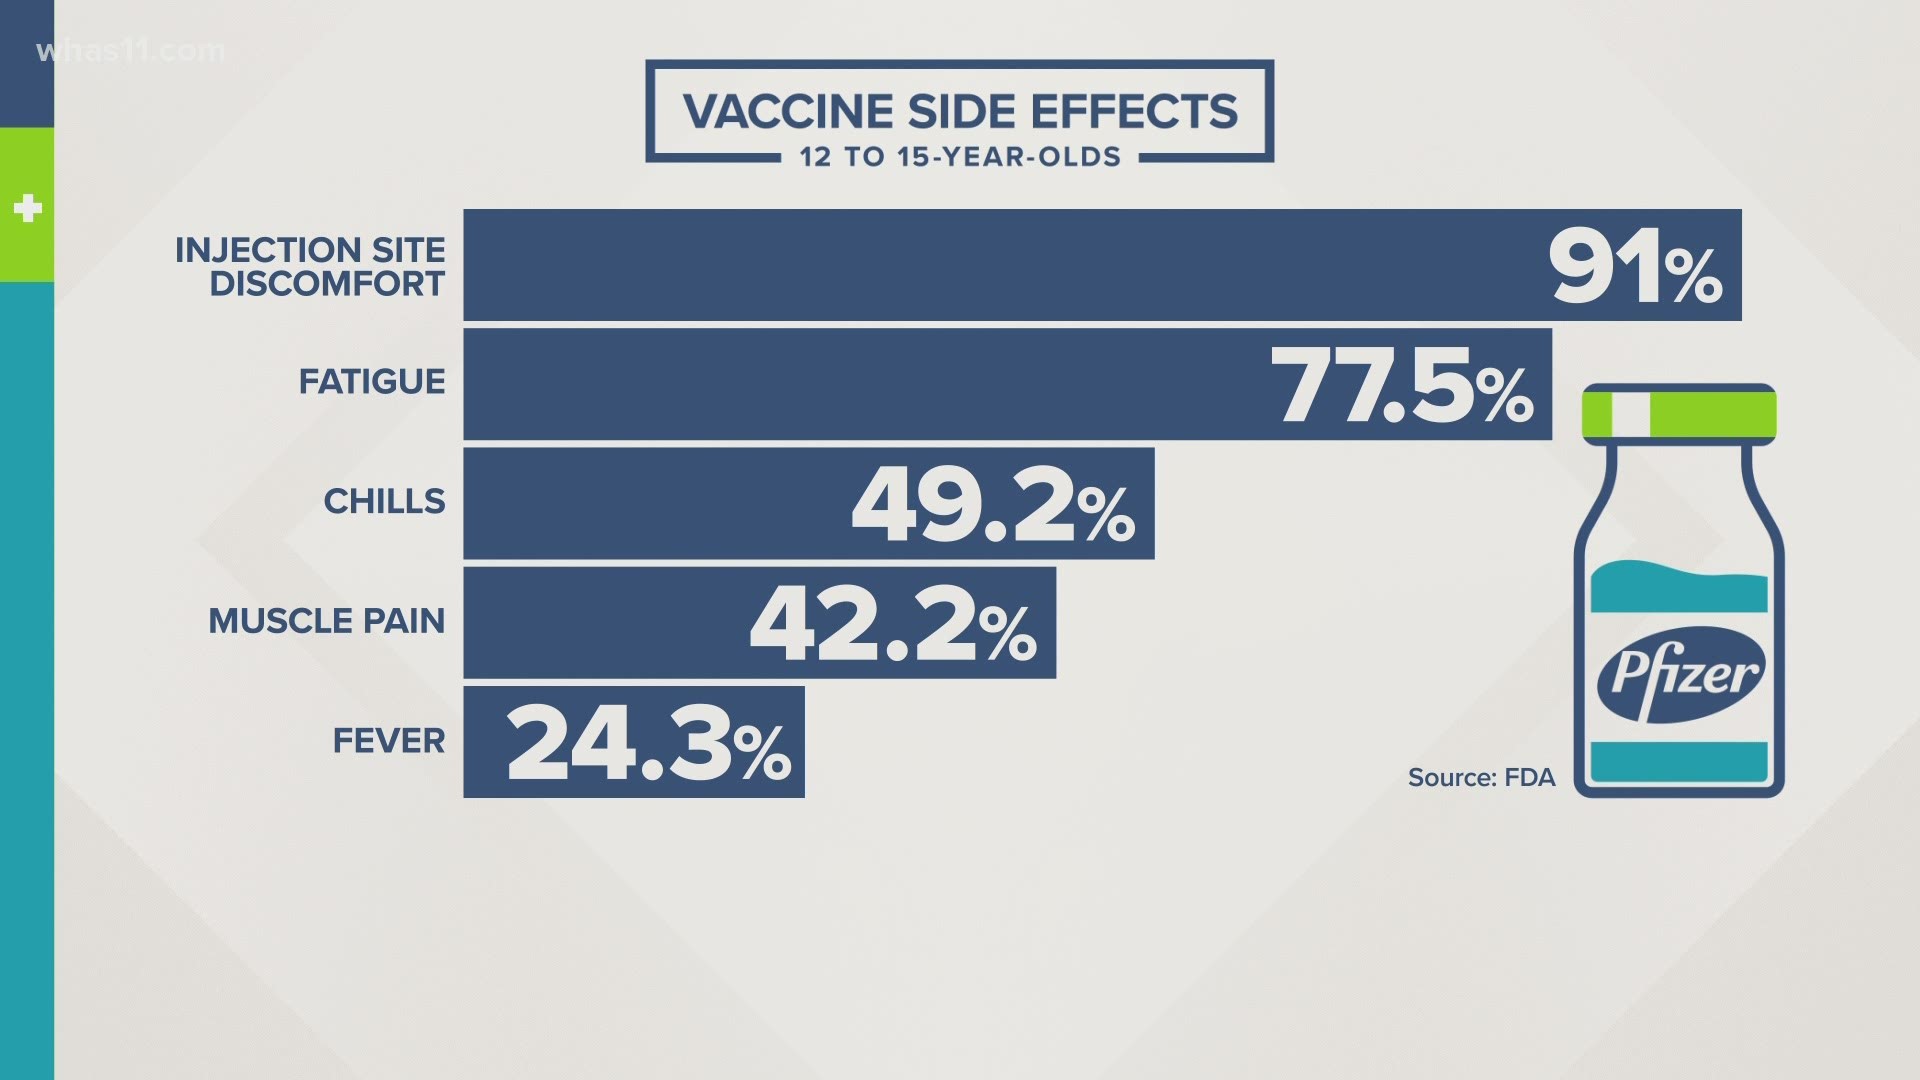 As with all vaccines, there are some side effects kids may experience after getting the vaccine.